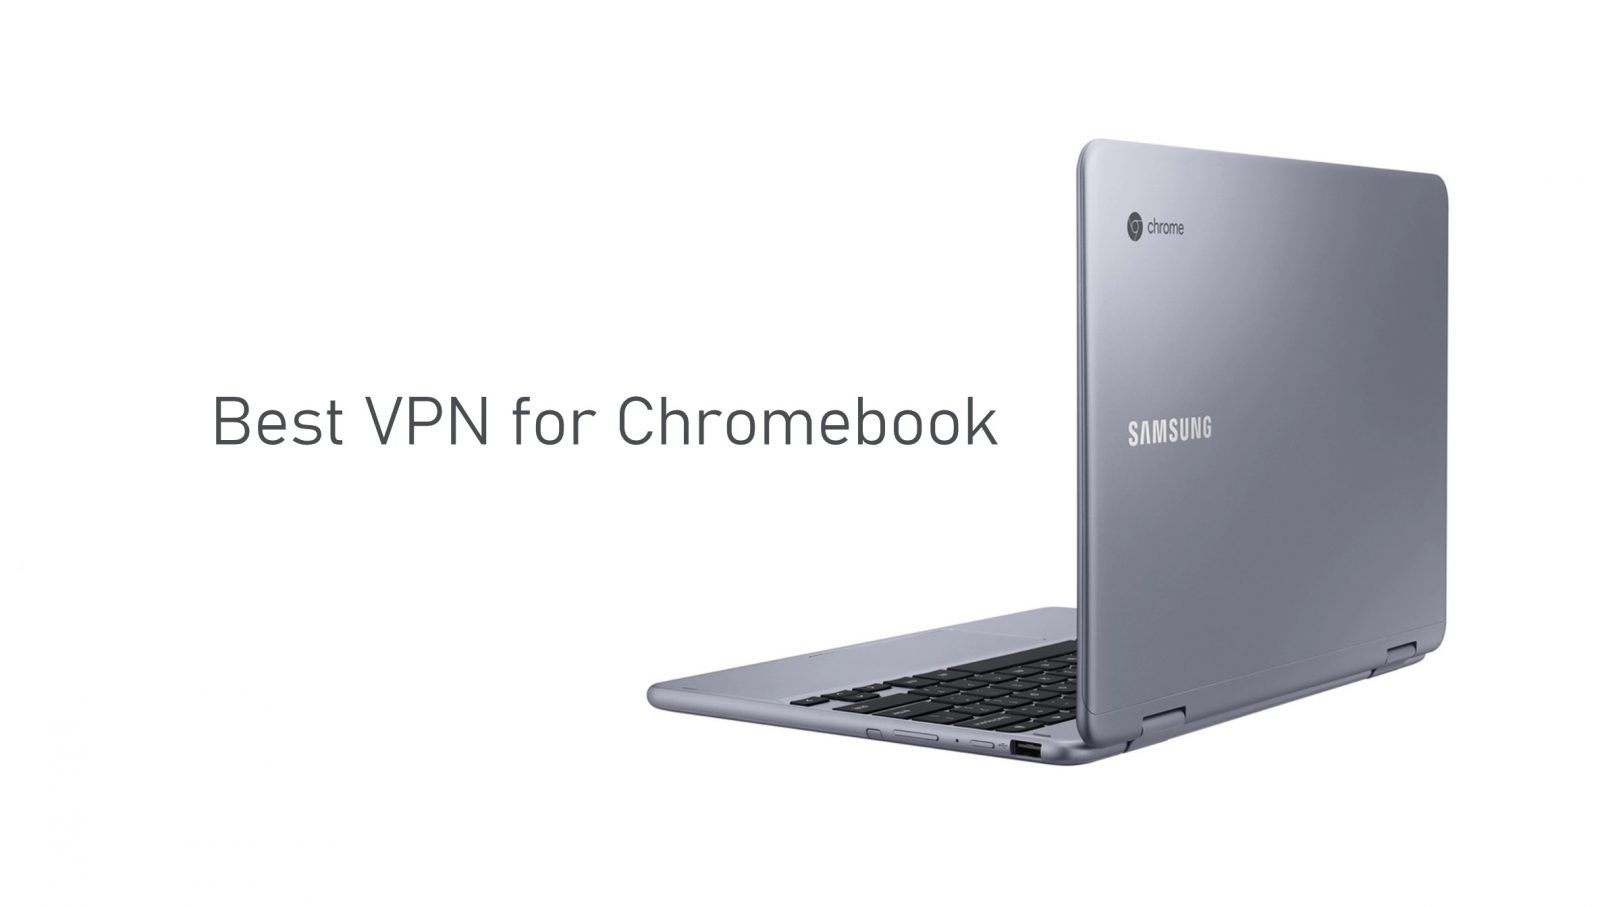 The Best VPN for Chromebook to use in 2021 - TechOwns